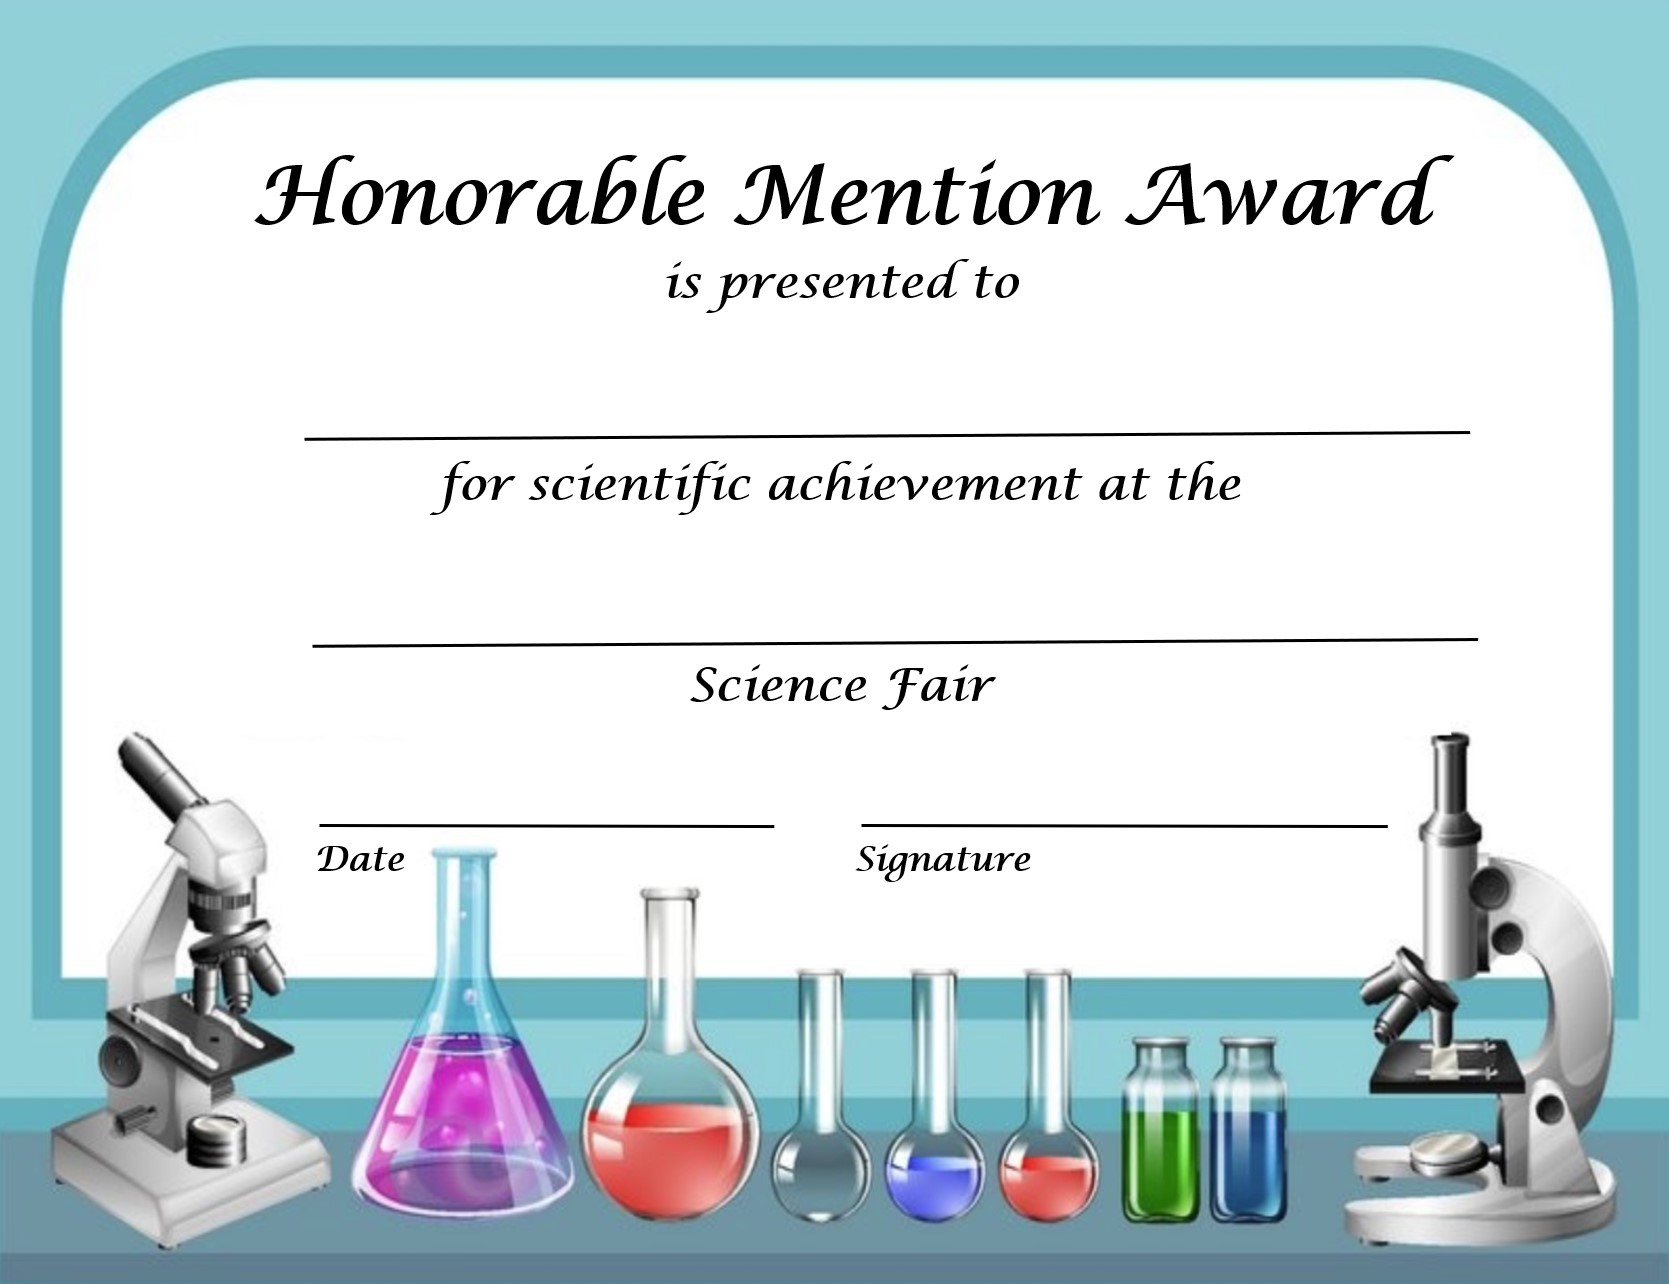 10 Science Fair Honorable Mention Award Certificates Bell 2 Bell